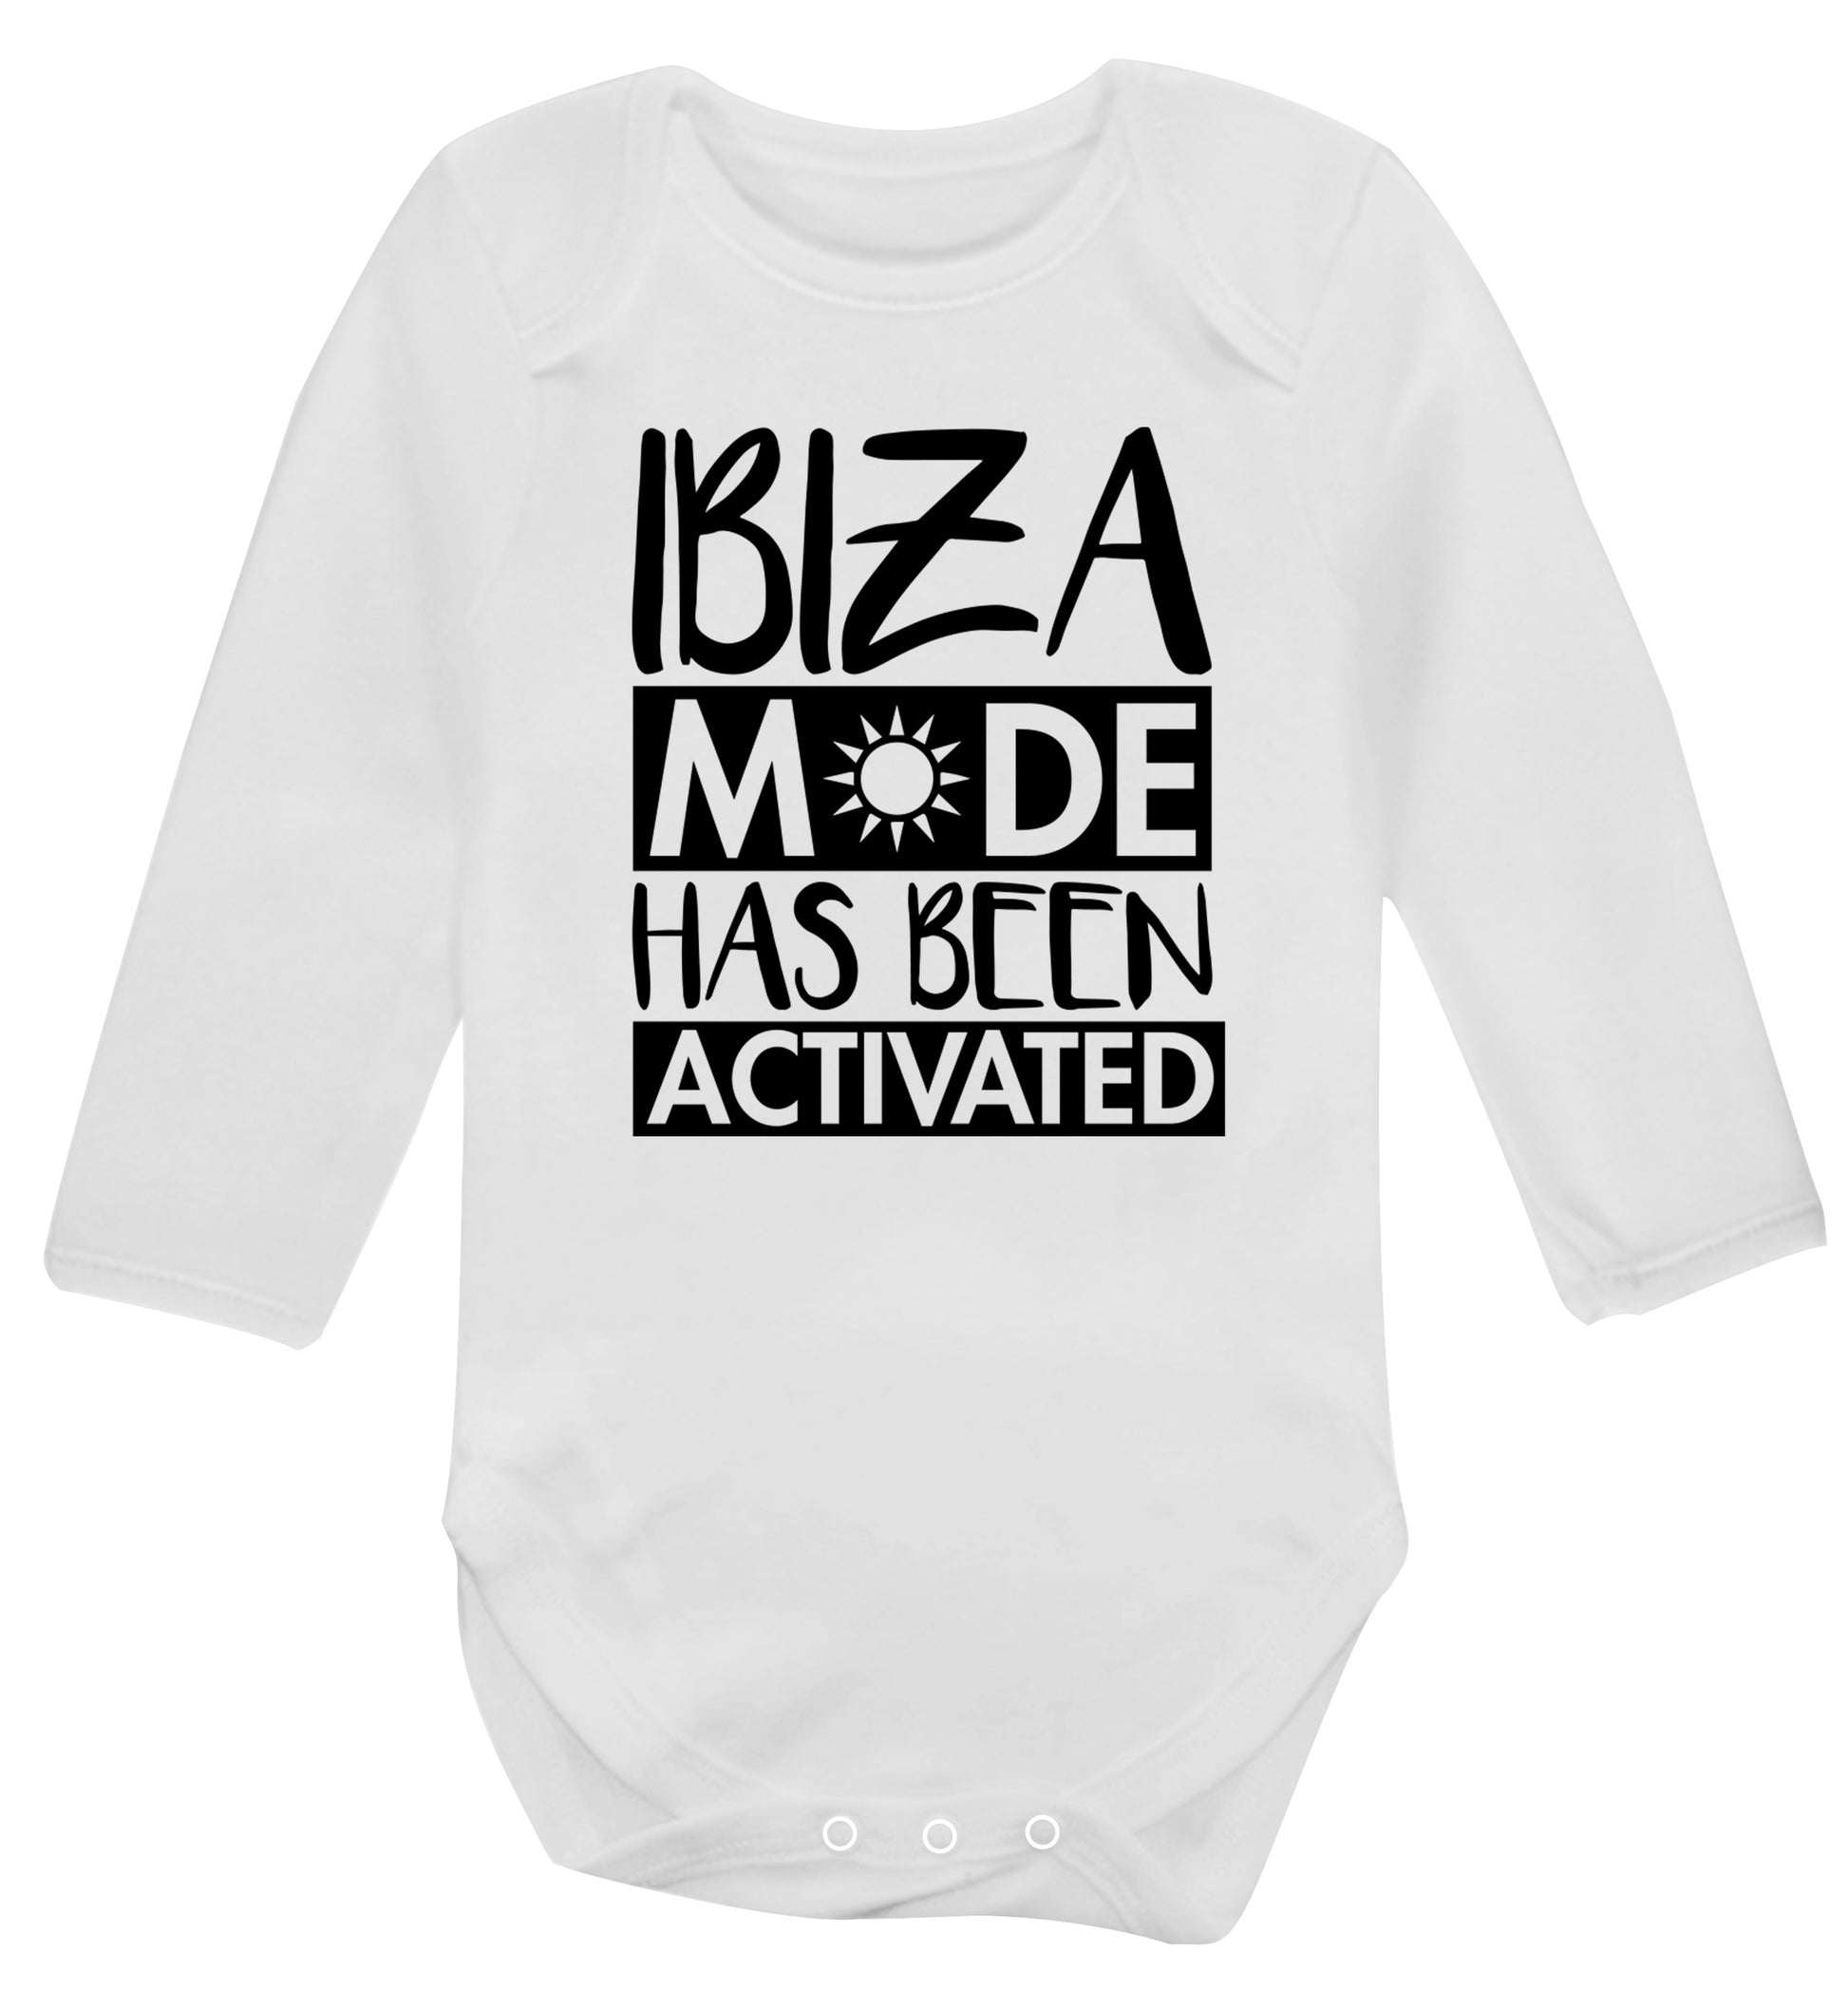 Ibiza mode has been activated Baby Vest long sleeved white 6-12 months